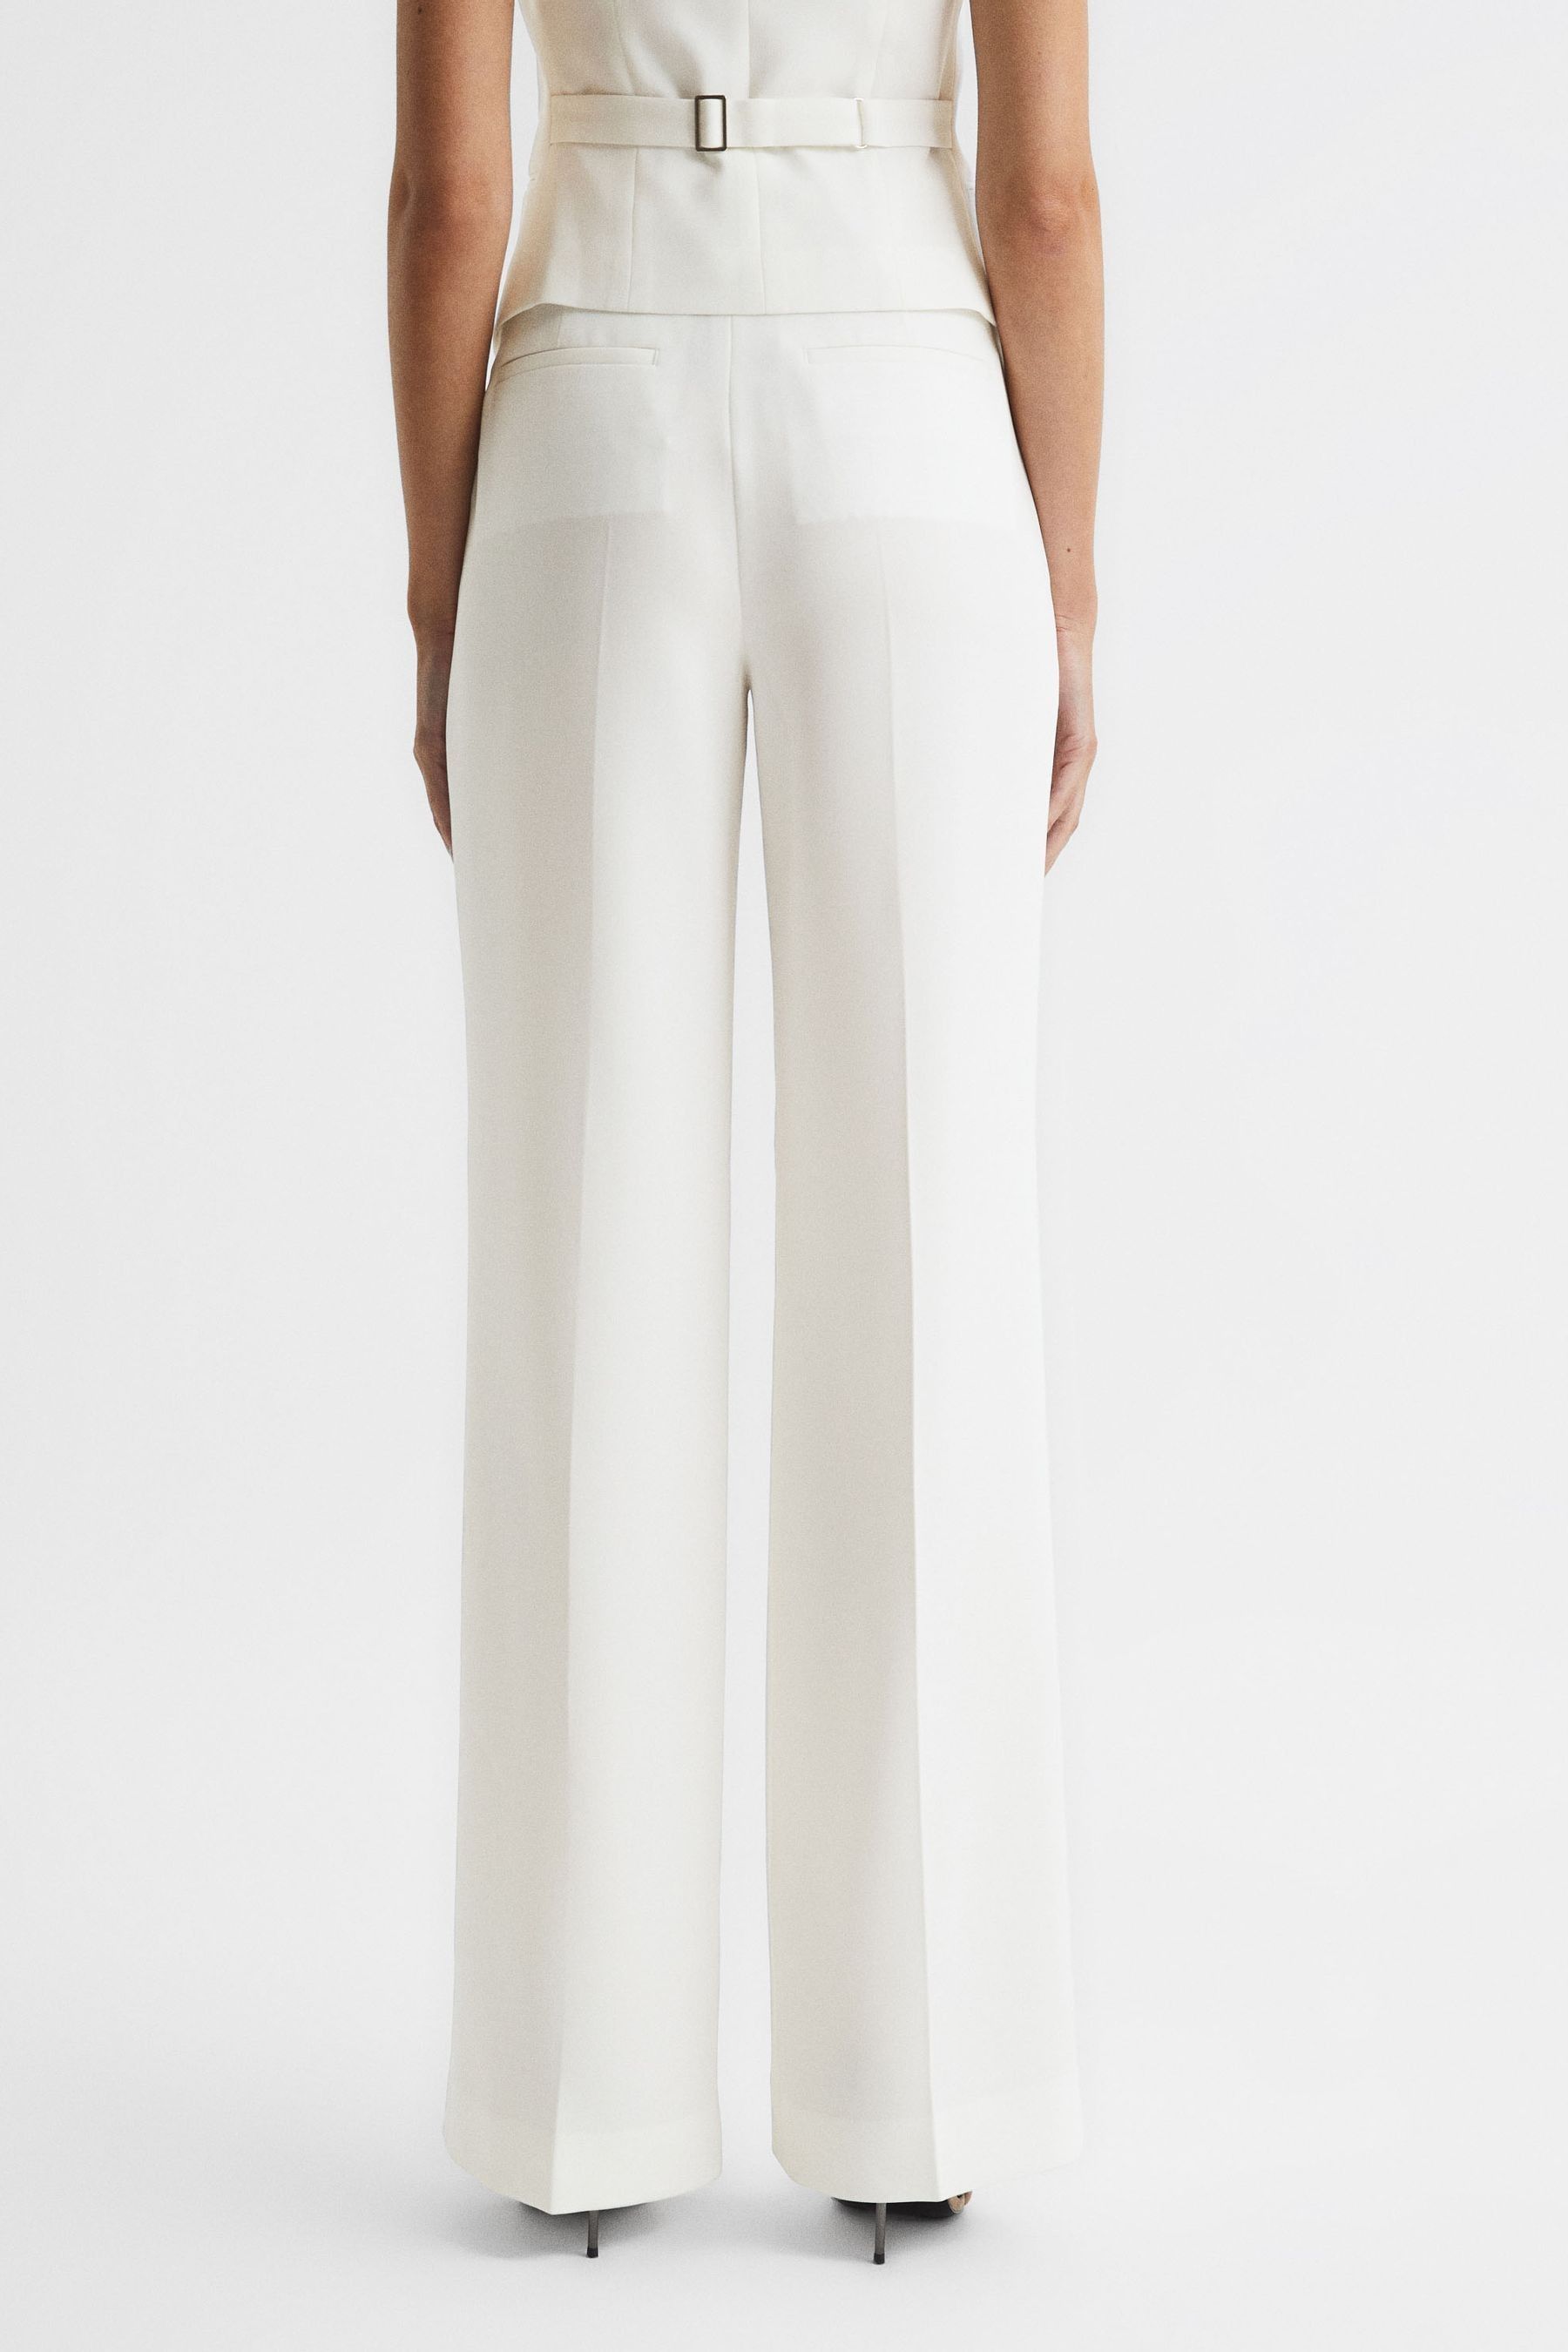 Buy Reiss White Tatum Crepe Wide Leg Trousers from the Next UK online shop